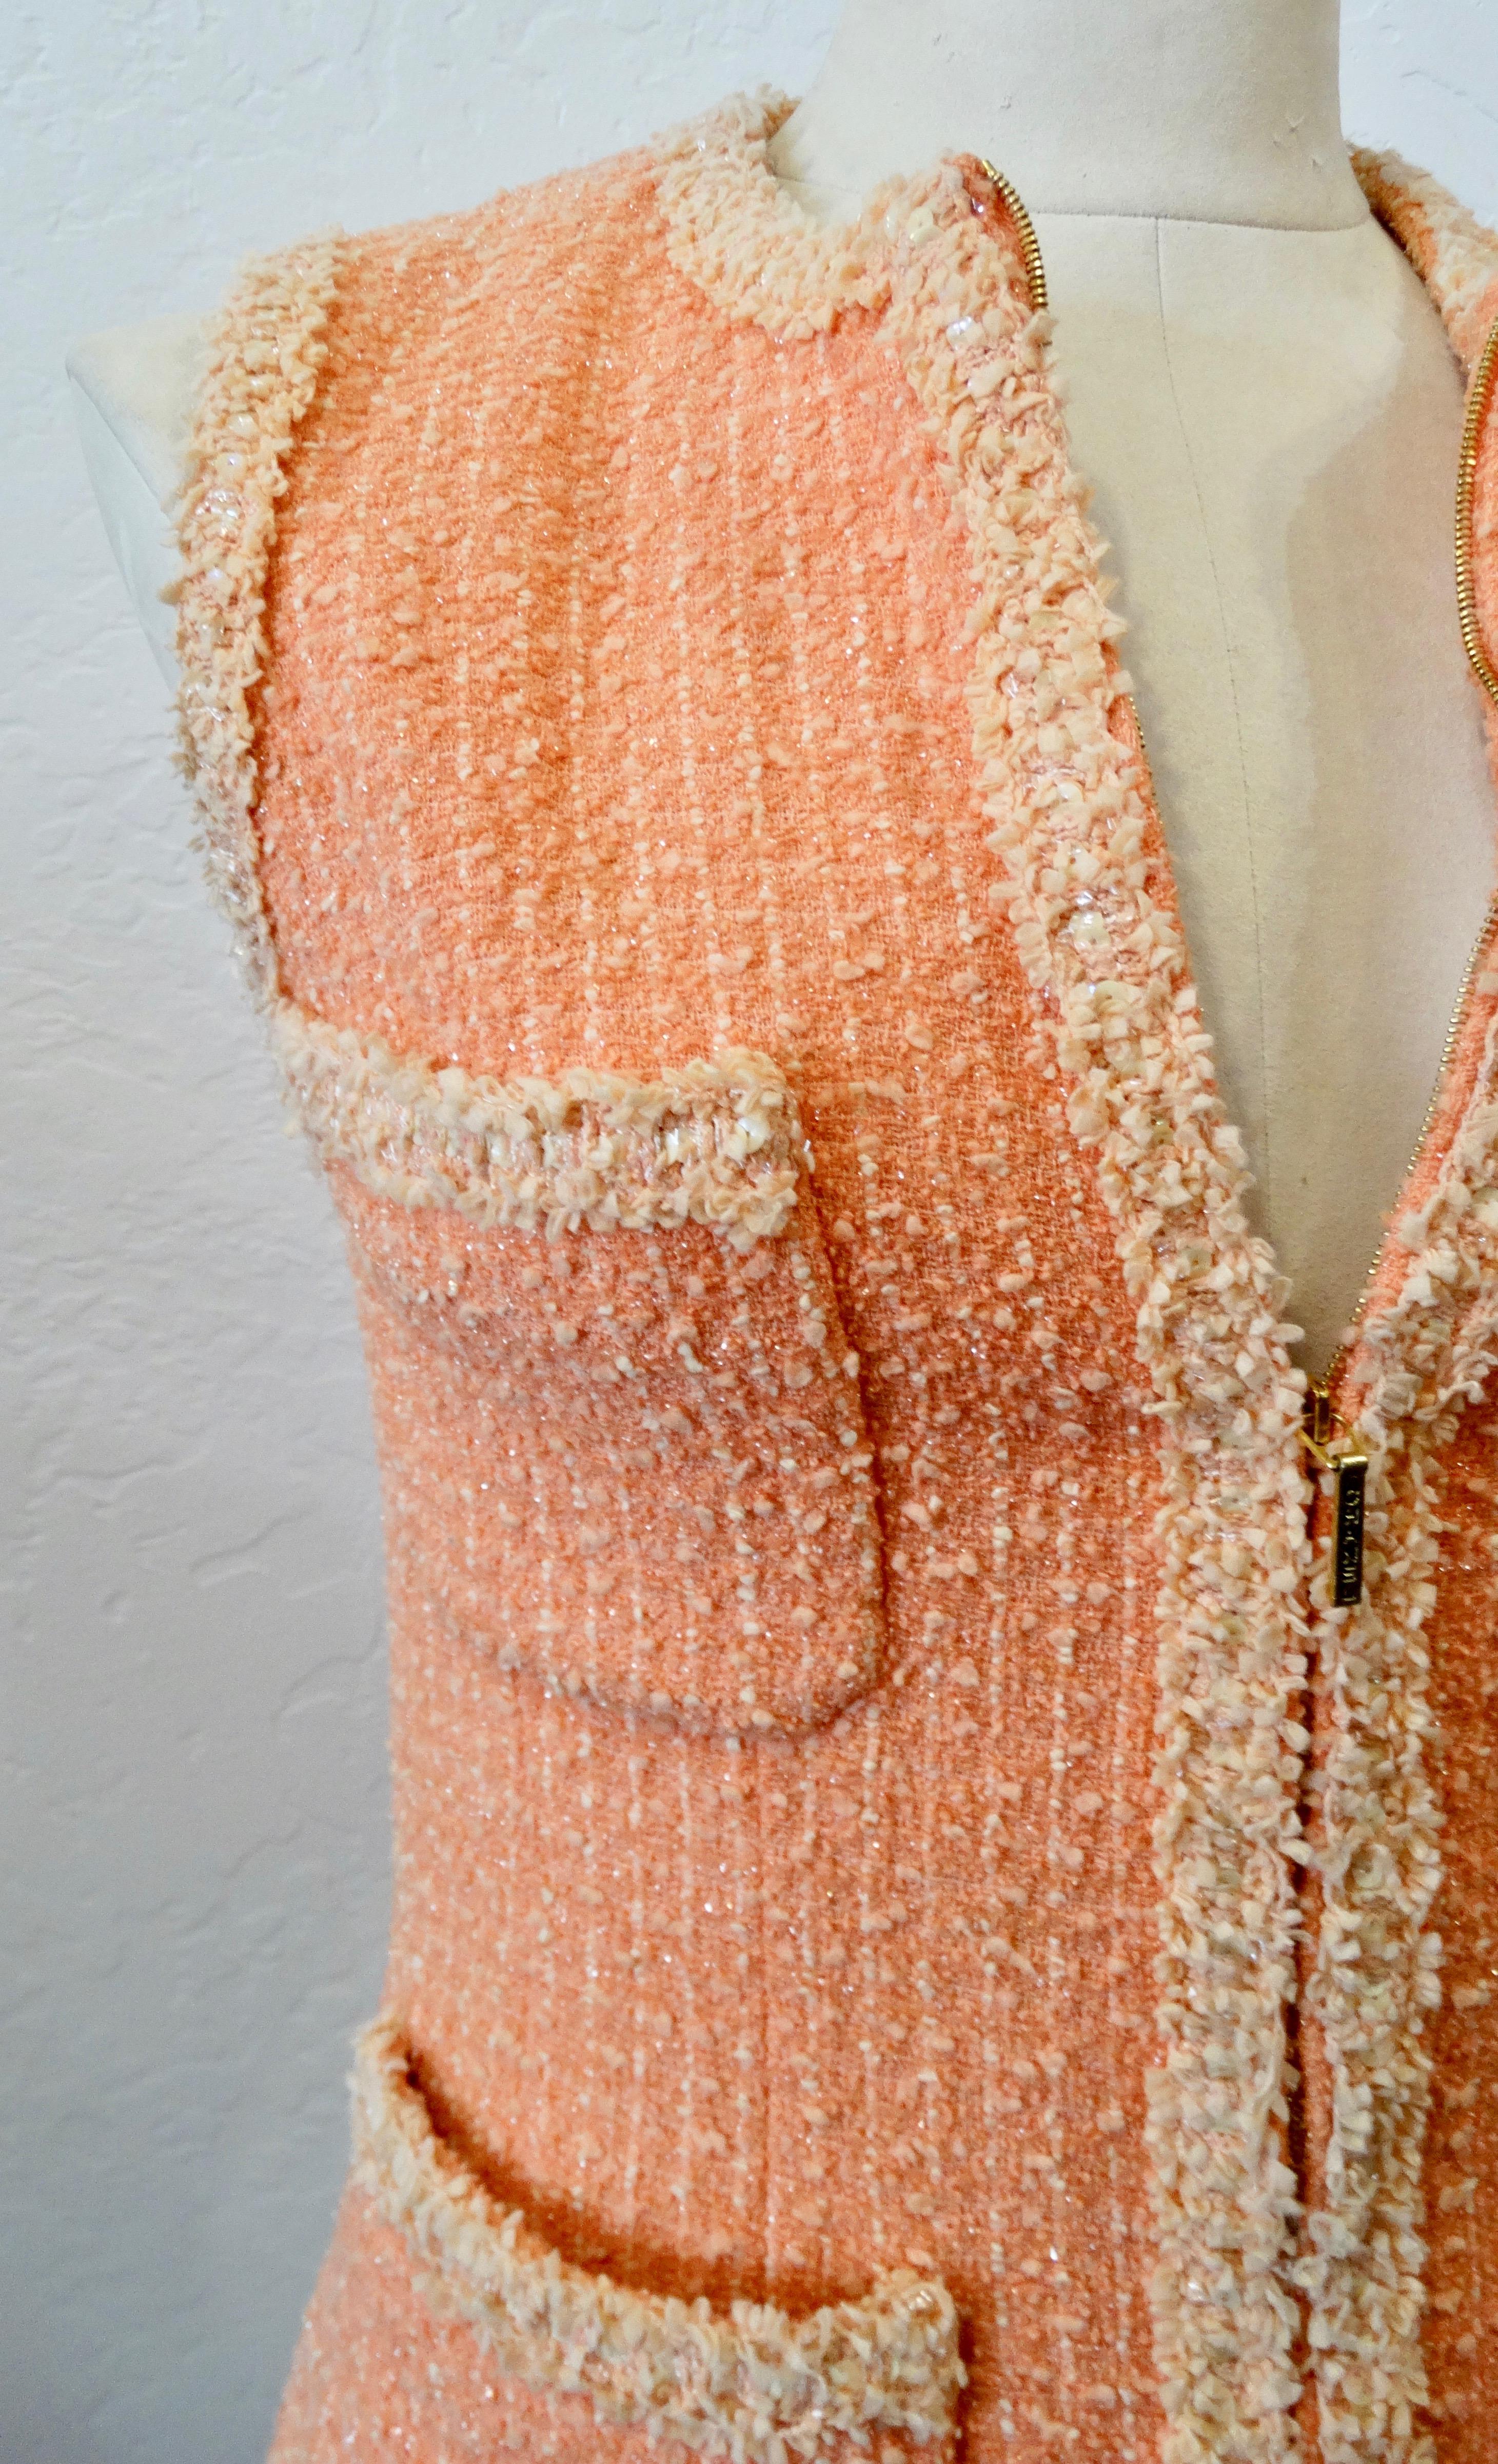 It doesn't get any better than 1990s Chanel by Karl Lagerfeld himself! Circa 1995, this adorable wool tweed vest is a great overall peach color intertwined with a contrasting light peach and subtle silver metallic thread. The light peach color is